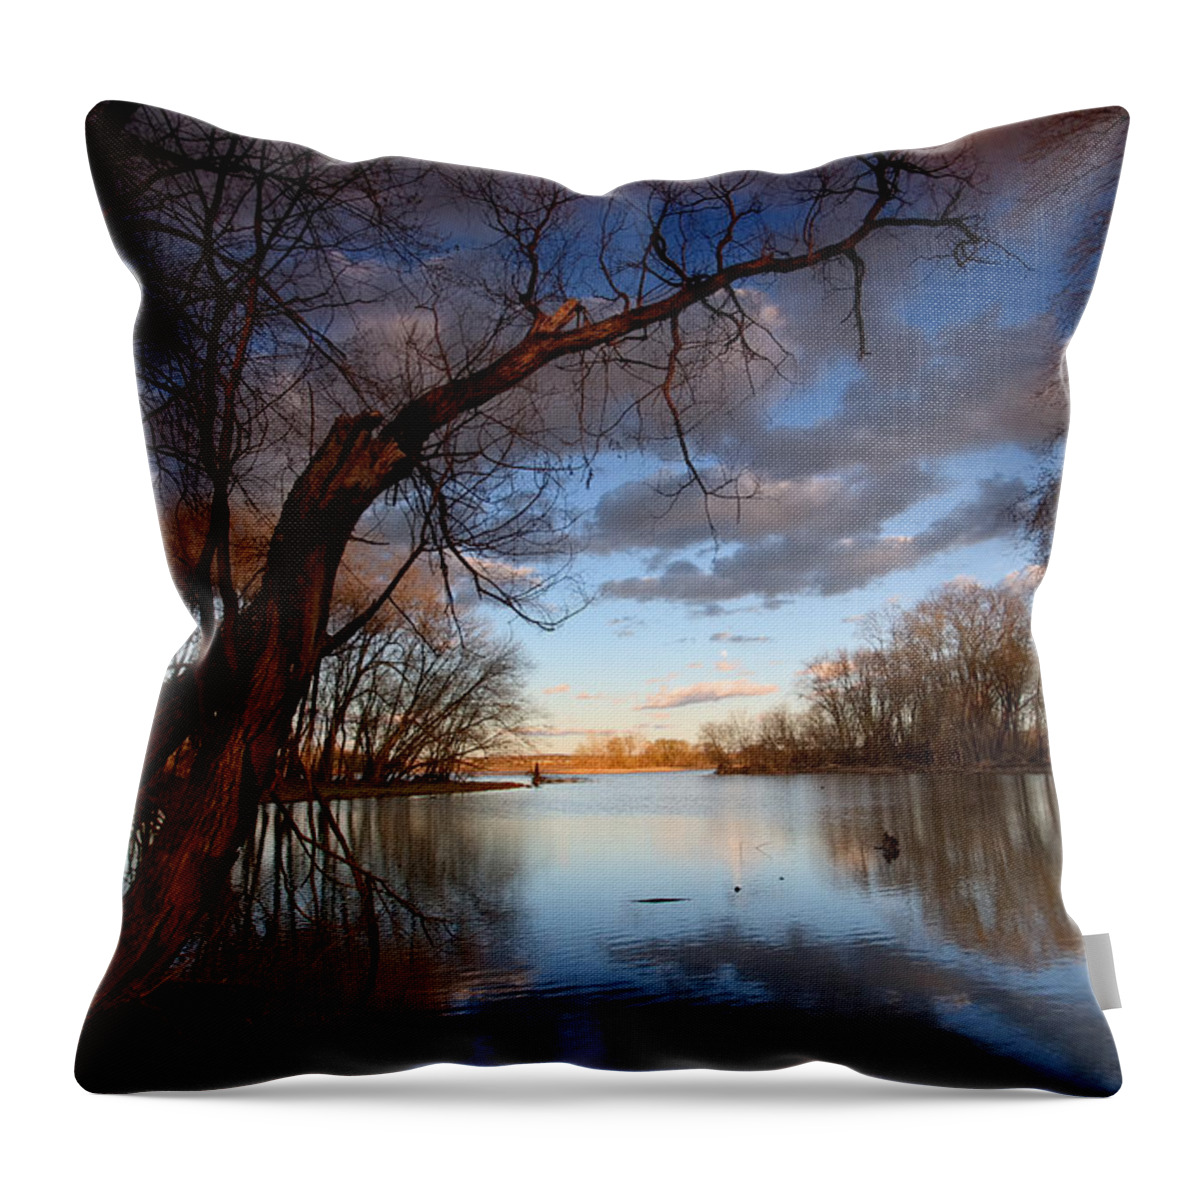 Mohawk River Throw Pillow featuring the photograph Blue Bayou by Neil Shapiro